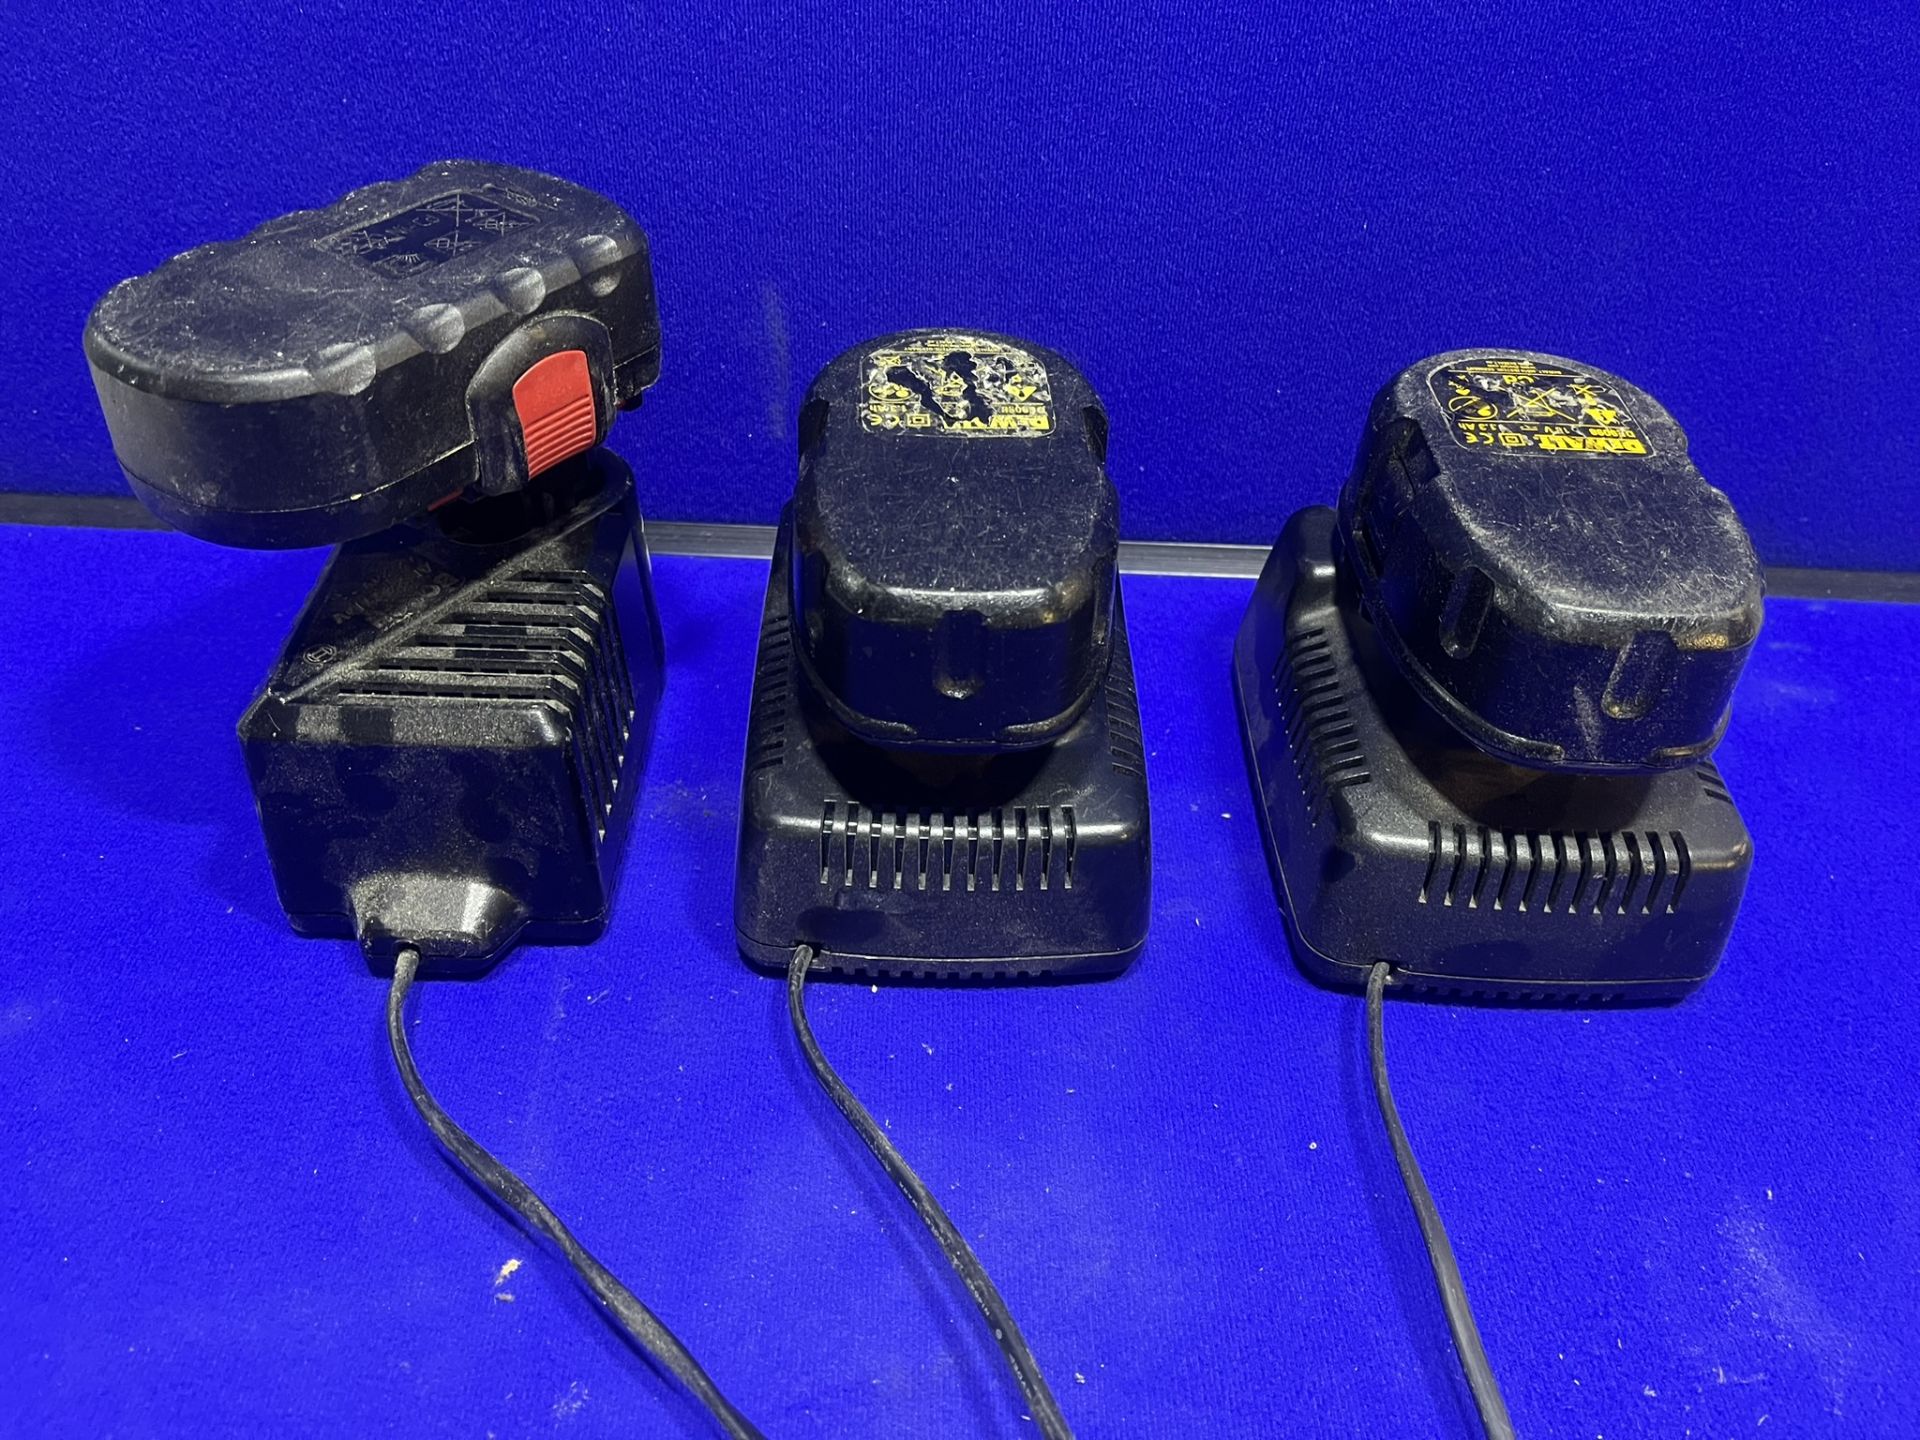 3 x Various Battery Charges W/ Batteries - As Pictured